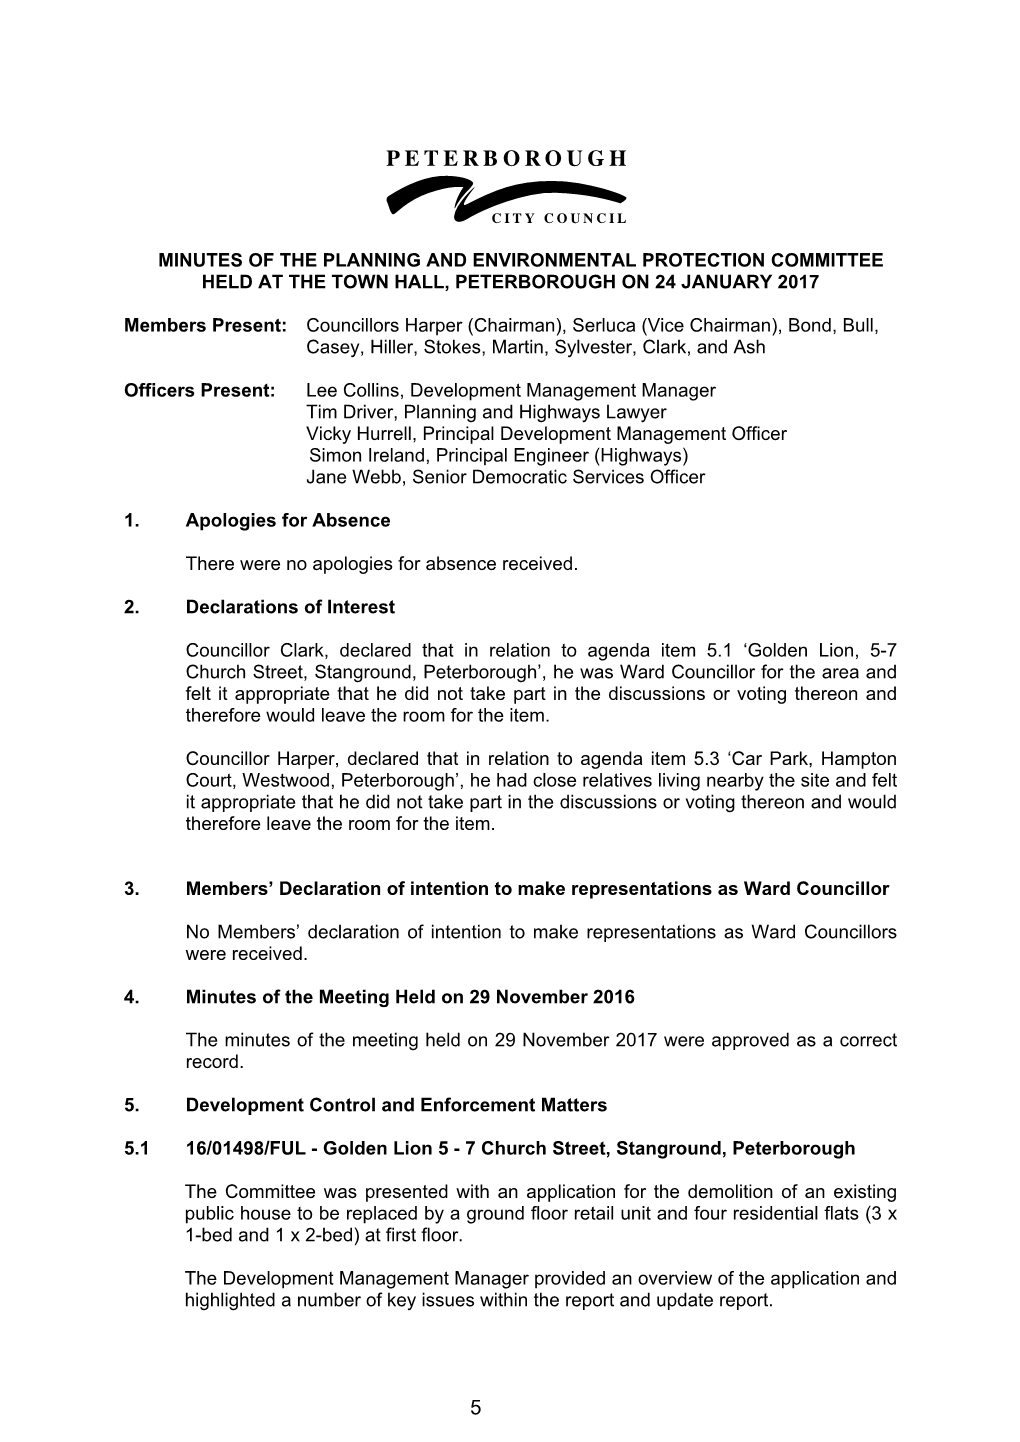 Minutes of the Planning and Environmental Protection Committee Held at the Town Hall, Peterborough on 24 January 2017